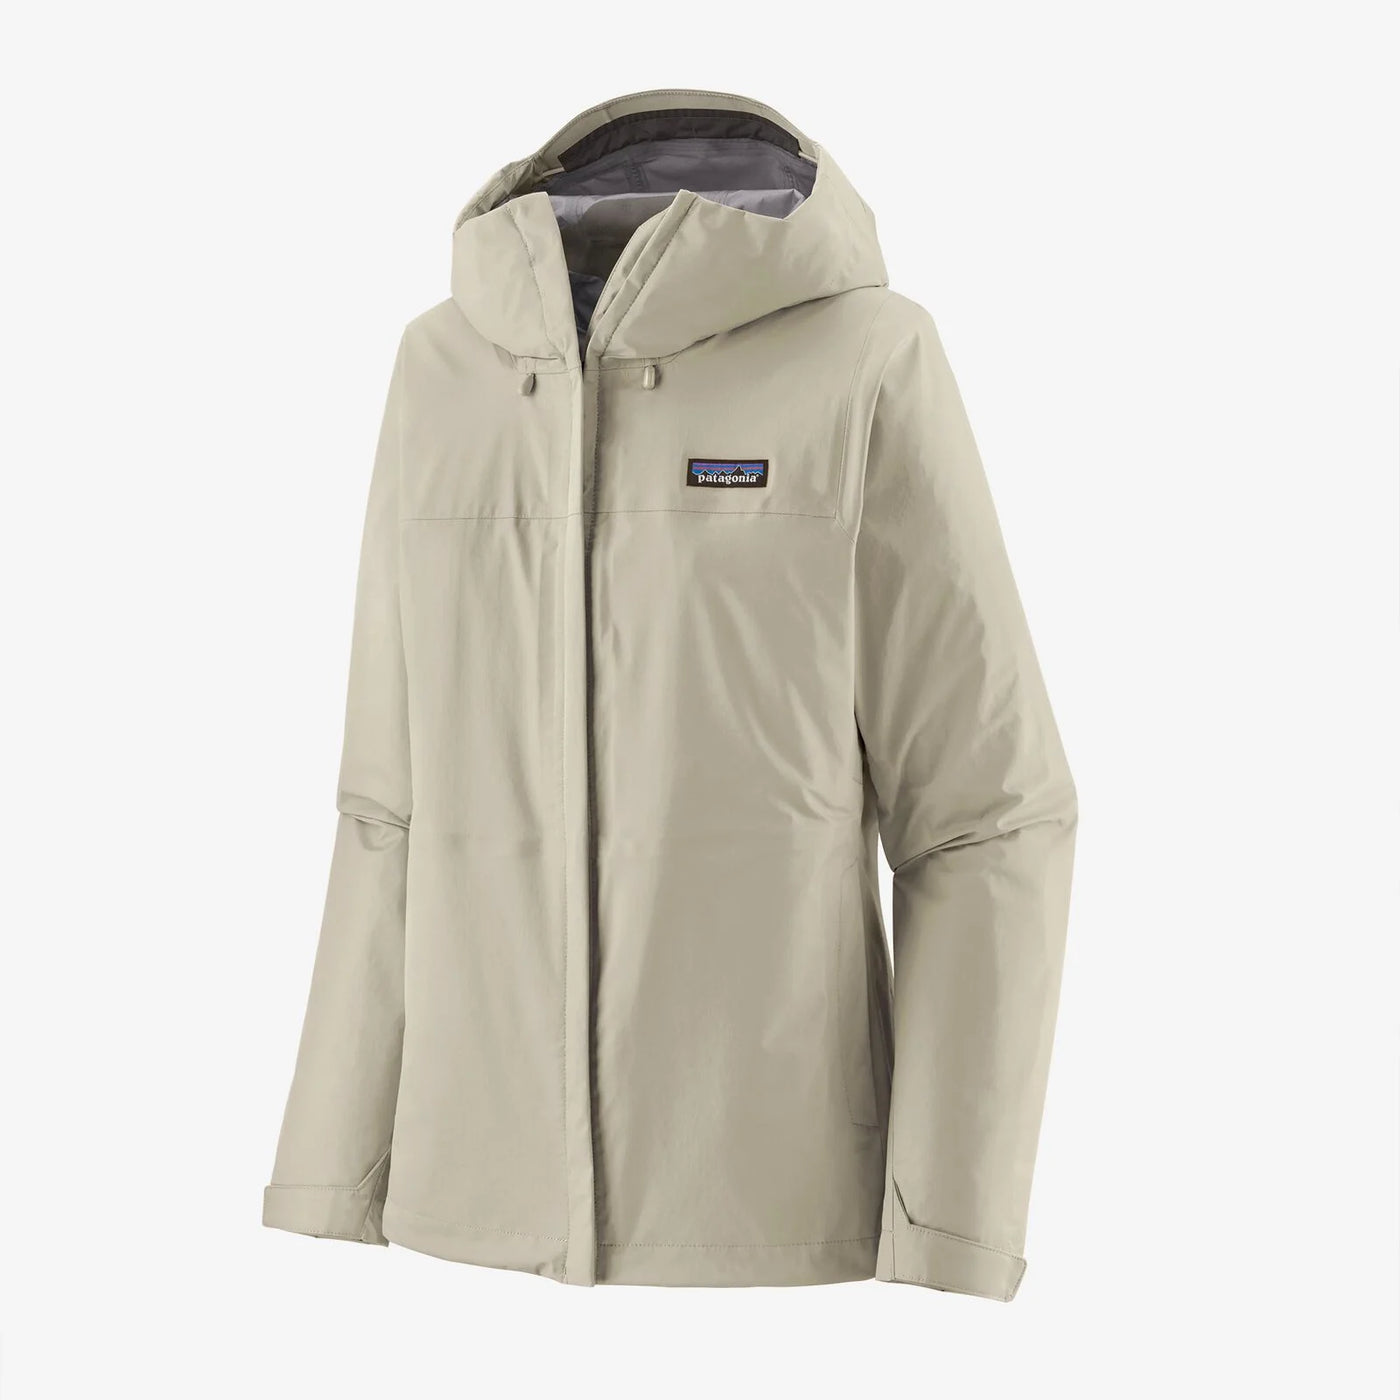 Patagonia Ladies Torrentshell 3L Jacket-Women's Clothing-Wool White-XS-Kevin's Fine Outdoor Gear & Apparel